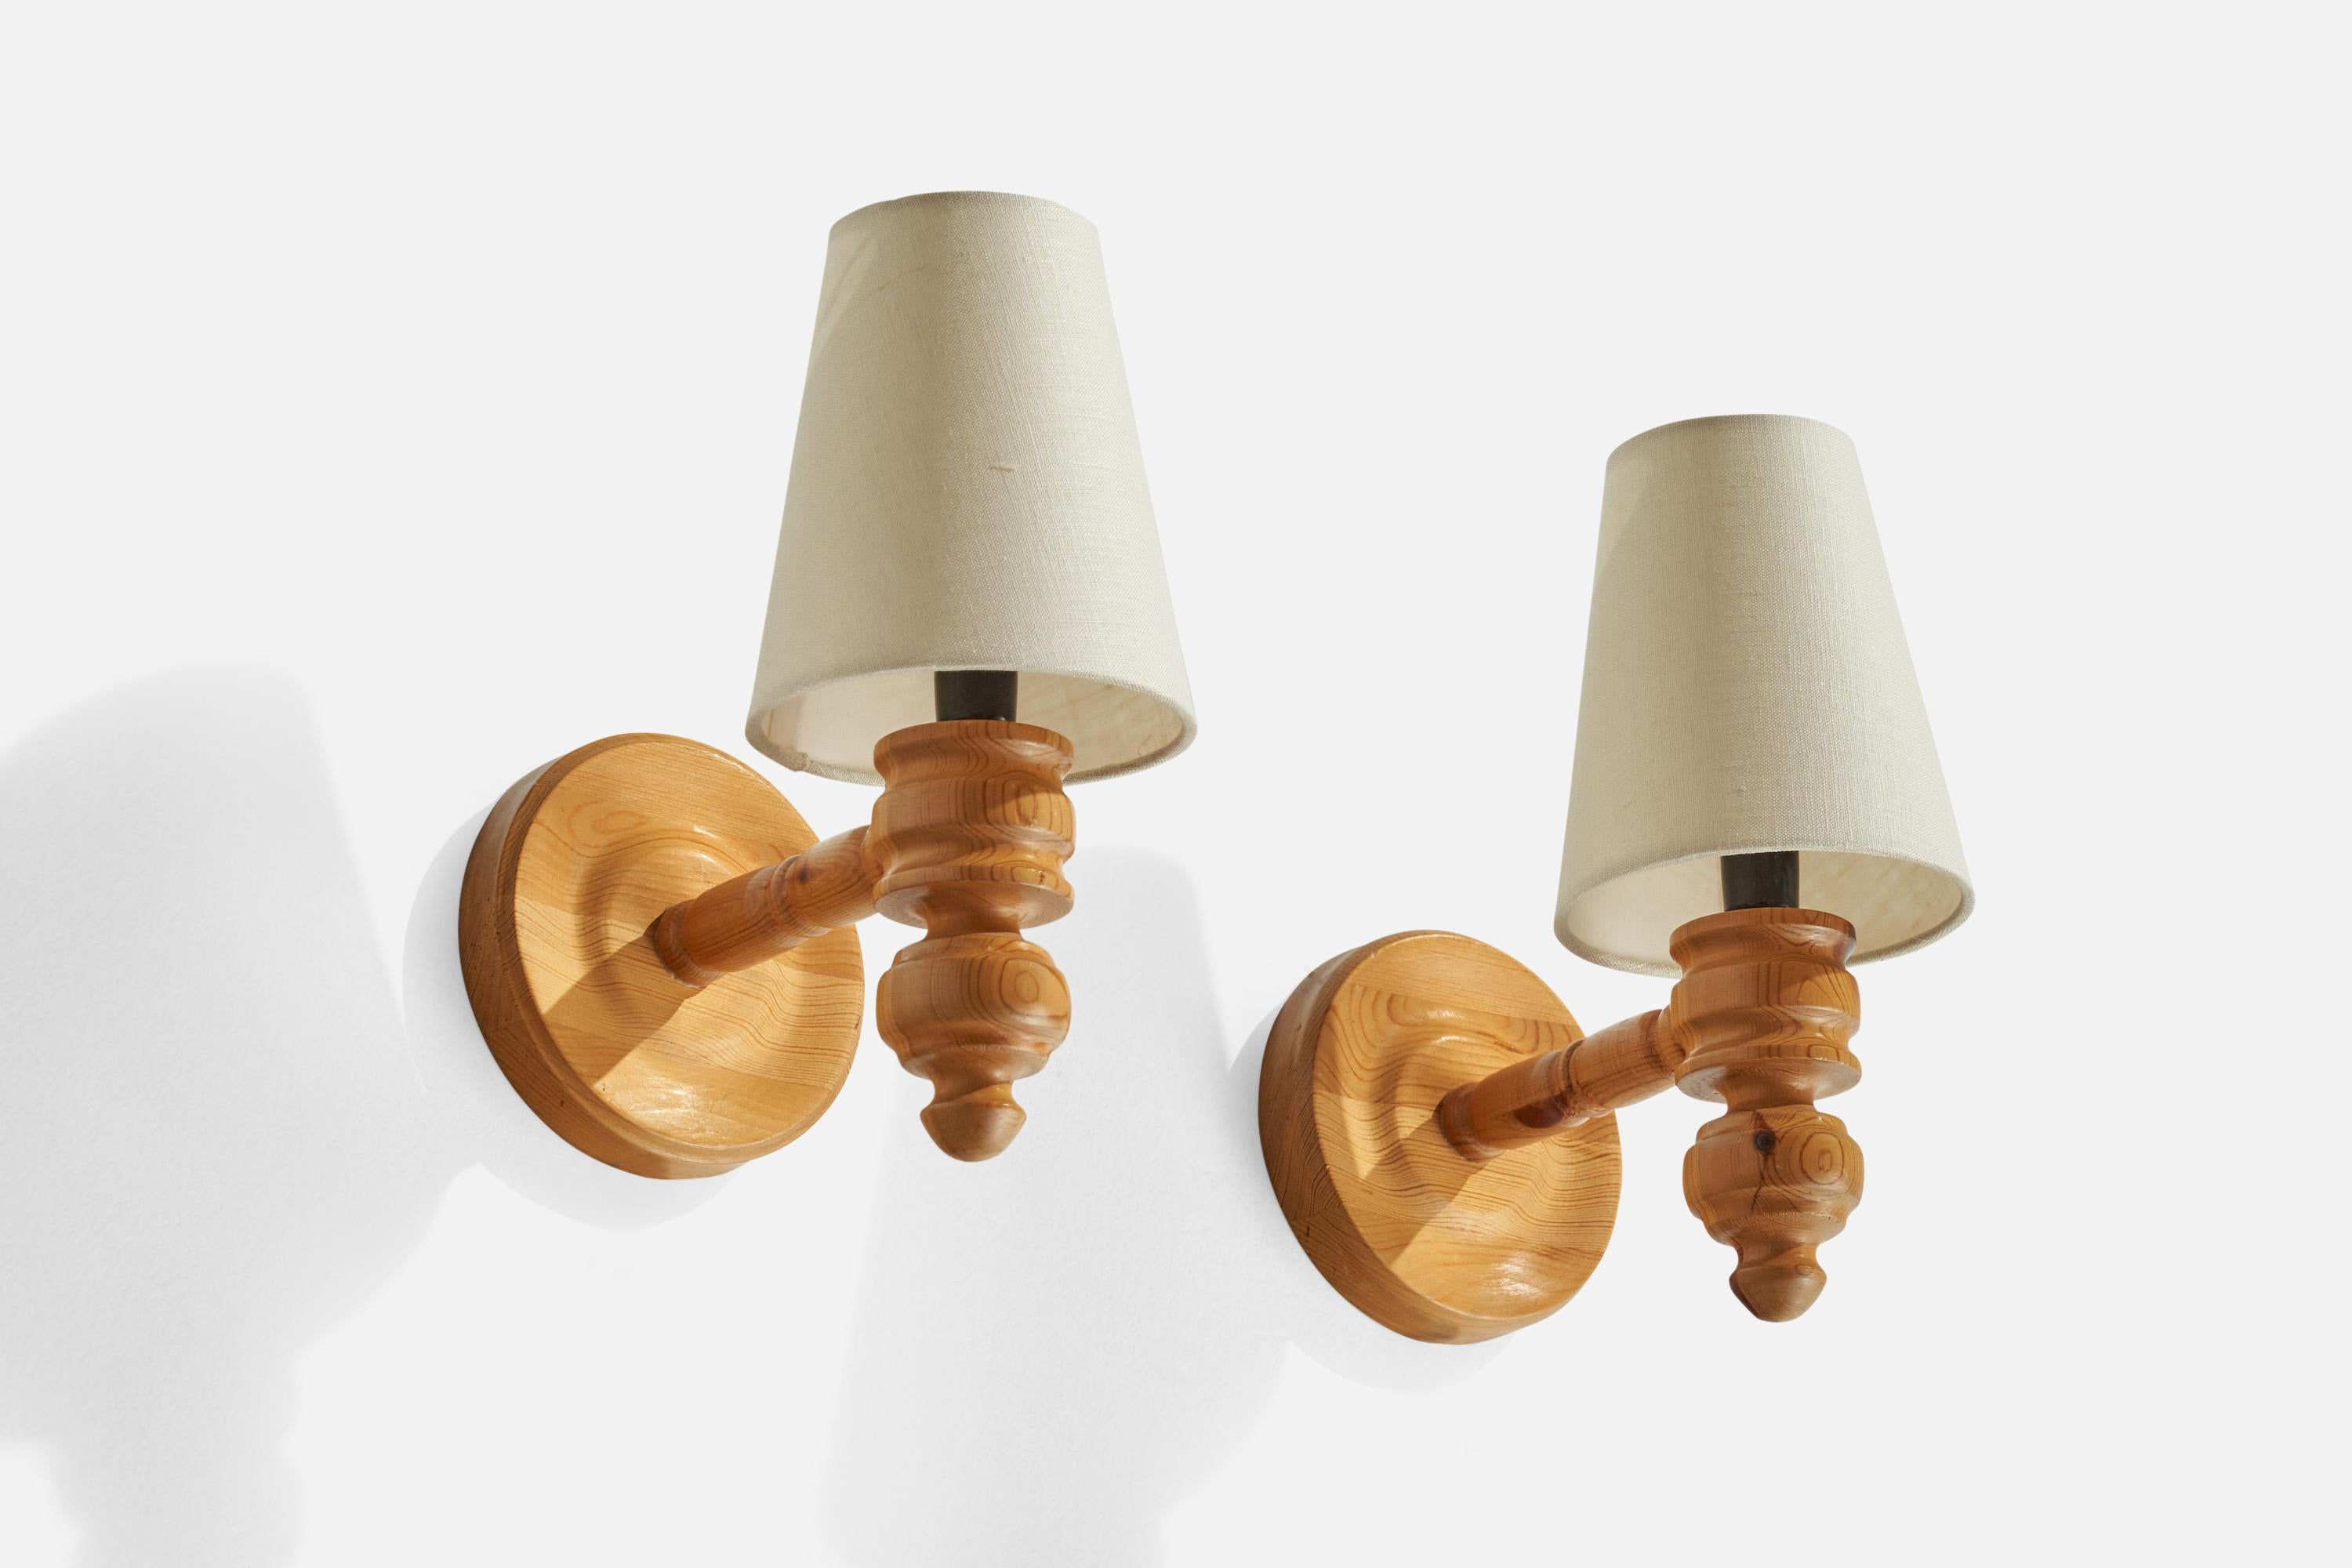 A pair of pine and white fabric wall lights designed and produced in Sweden, 1970s.

Overall Dimensions (inches): 7” H x 5.25” W x 7.5” D
Back Plate Dimensions (inches): 5.26”H x 5.25” W x 1” D
Bulb Specifications: E-14 Bulb
Number of Sockets: 2
All